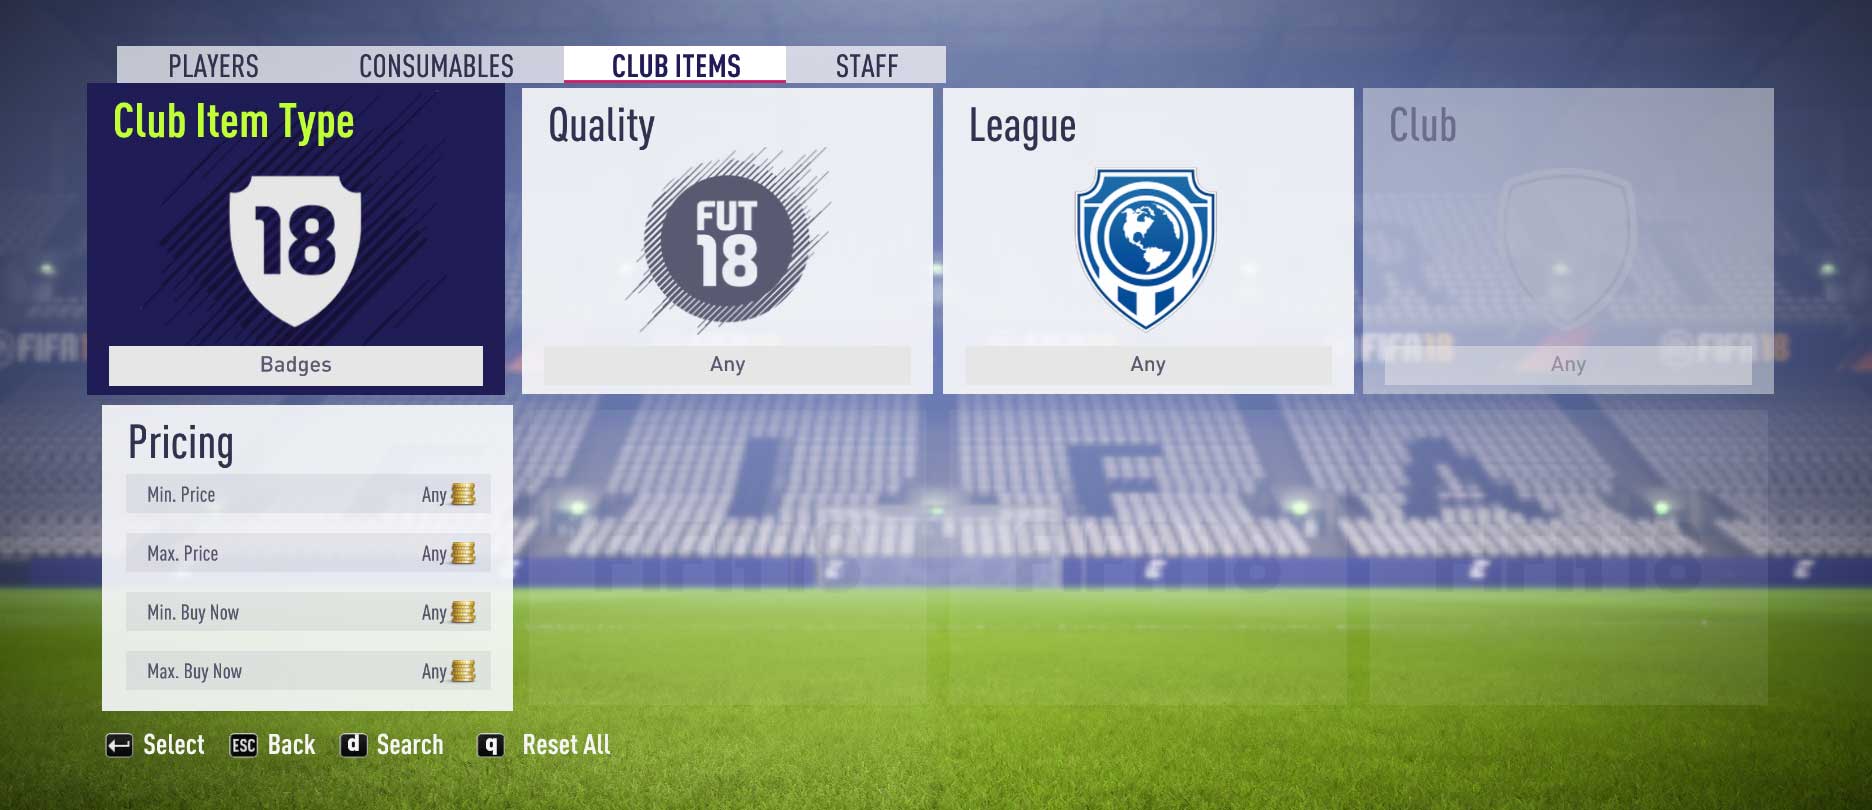 FIFA 18 Club Items Guide - Kits, Badges, Balls and Stadiums